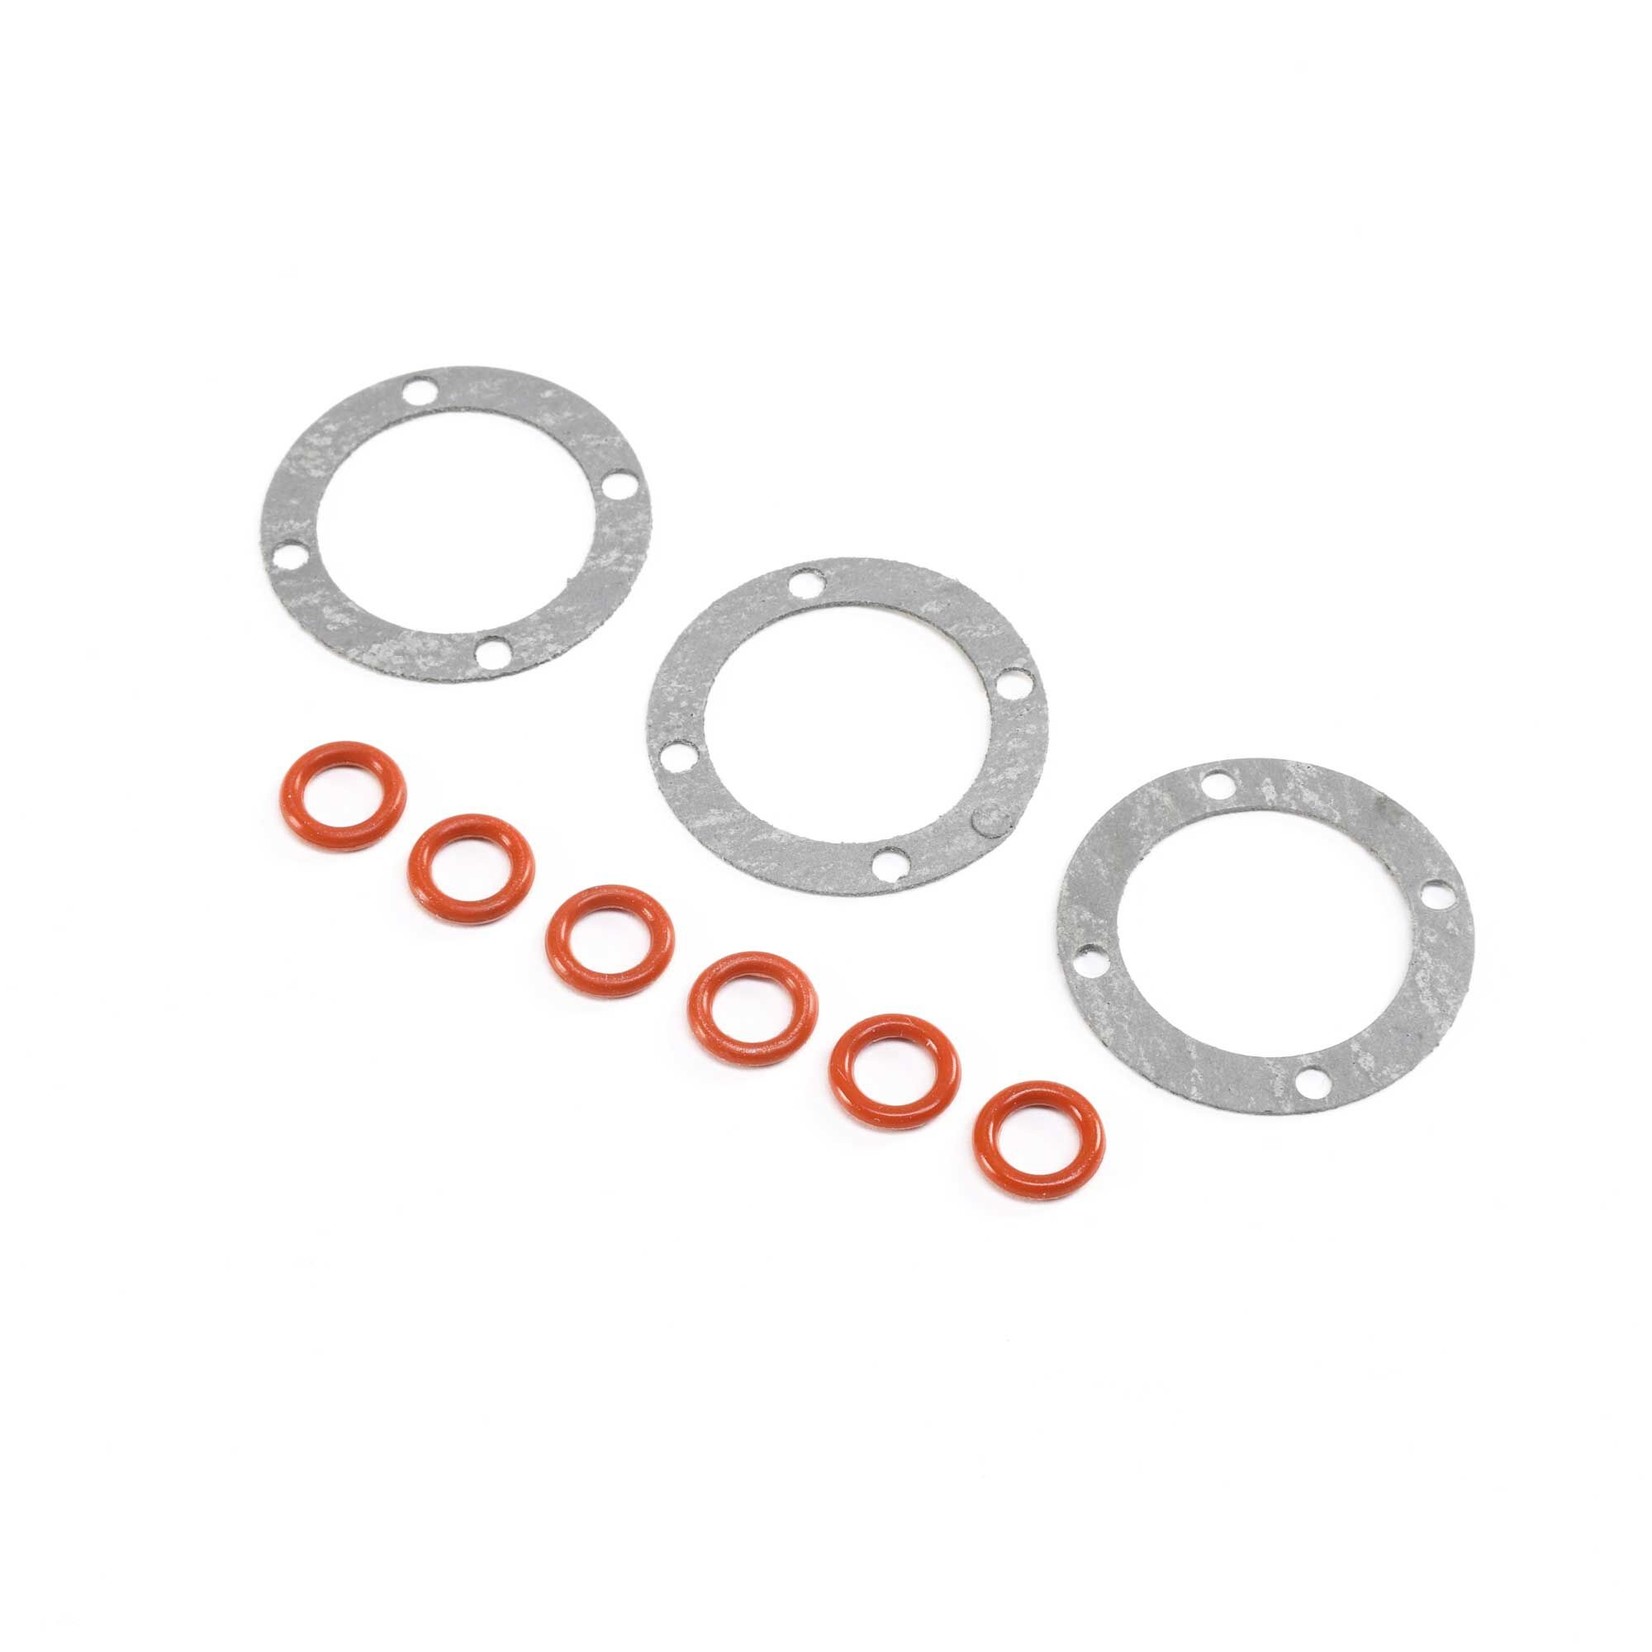 Losi Outdrive O-rings and Diff Gaskets (3): LMT